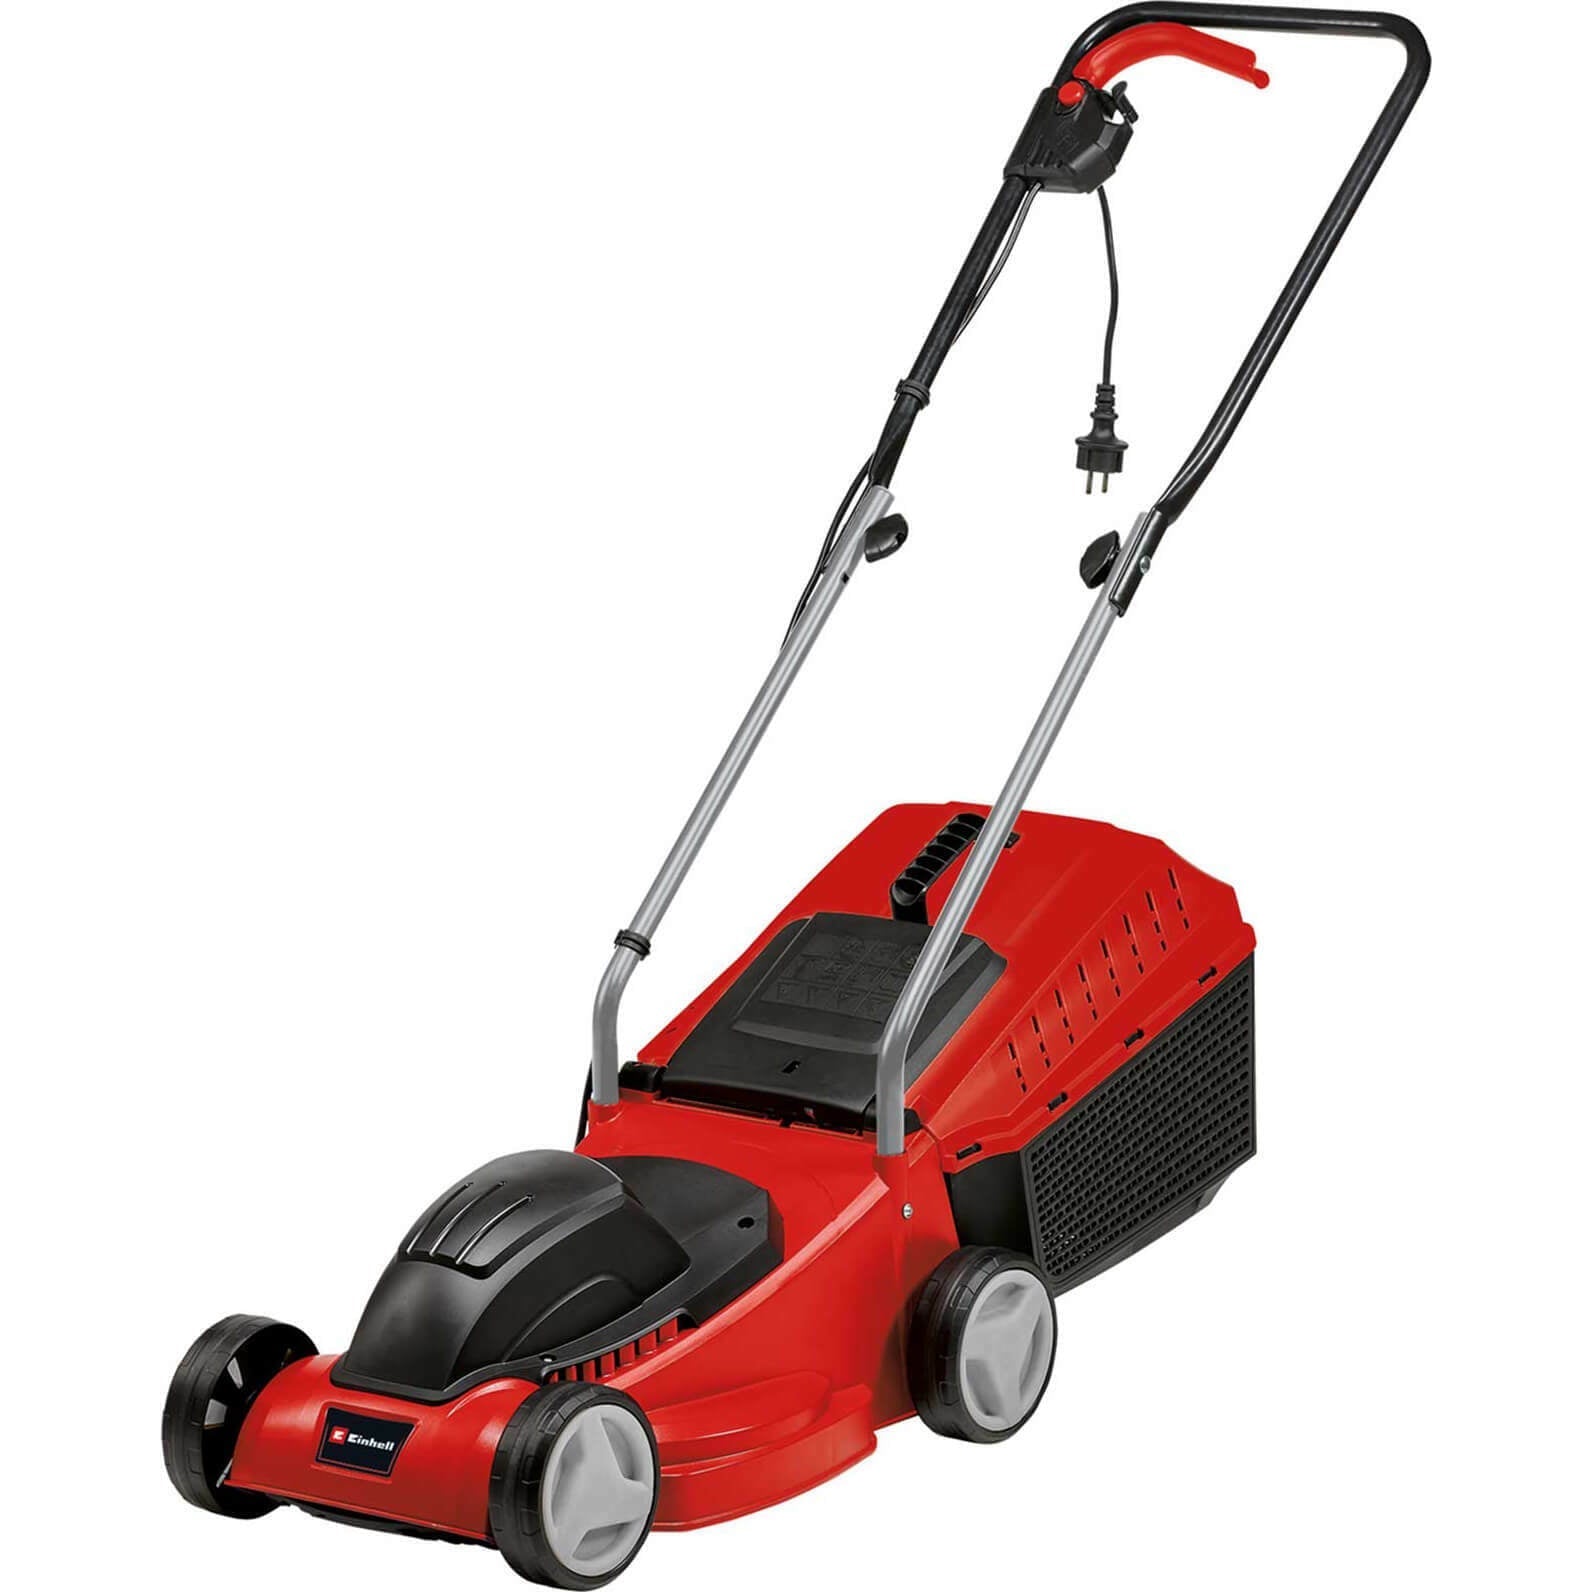 Einhell Electric Lawn Mower GC-EM 1032 Power Tool Services